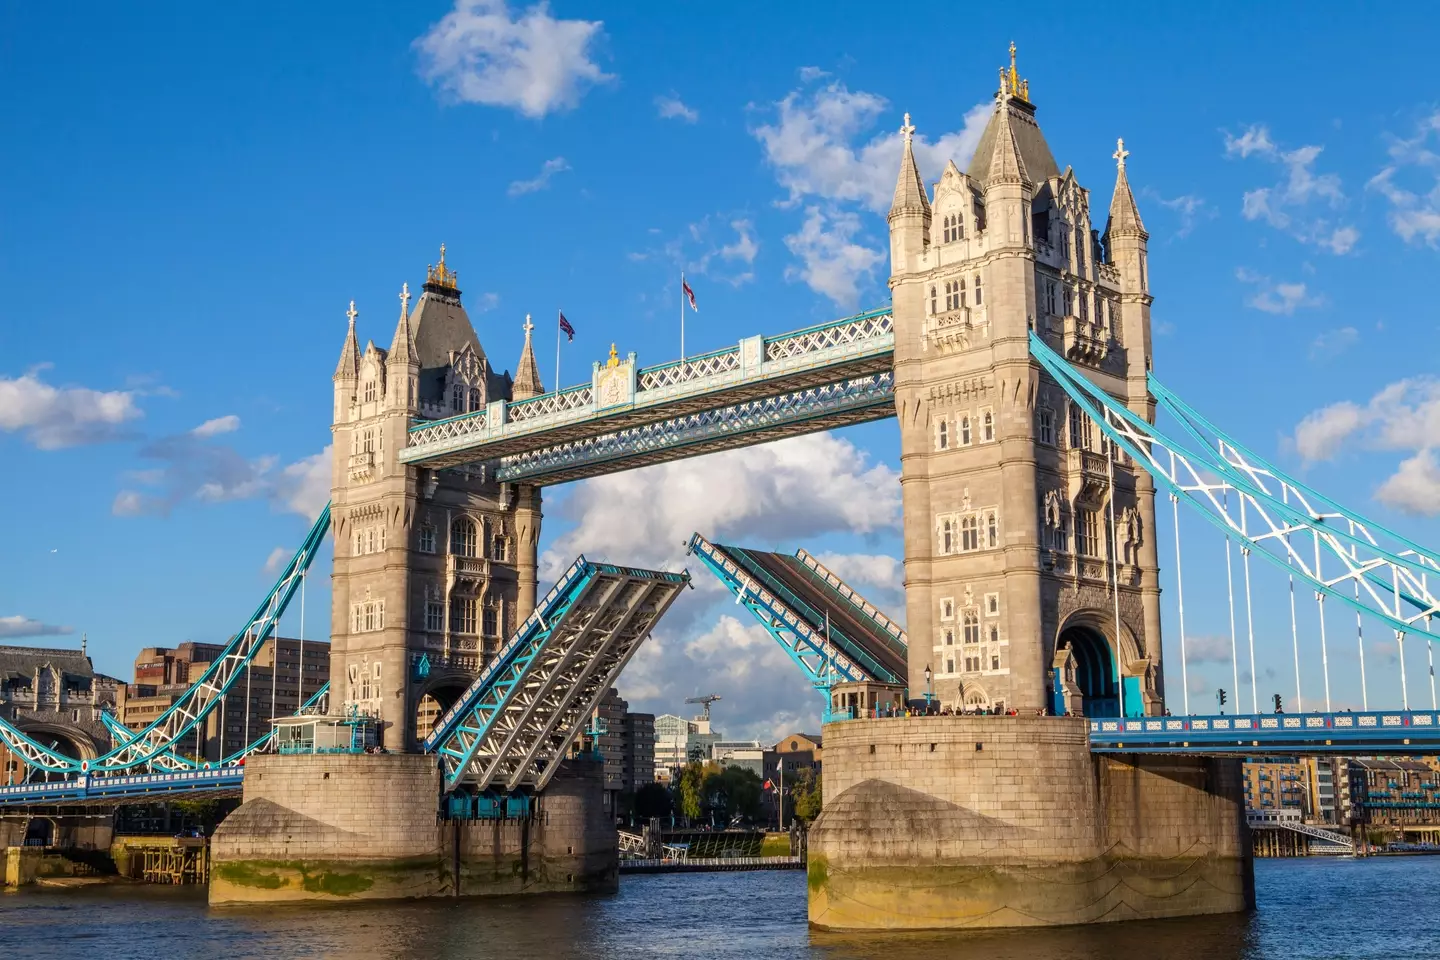 Tower Bridge has been open to the public since 1982 (